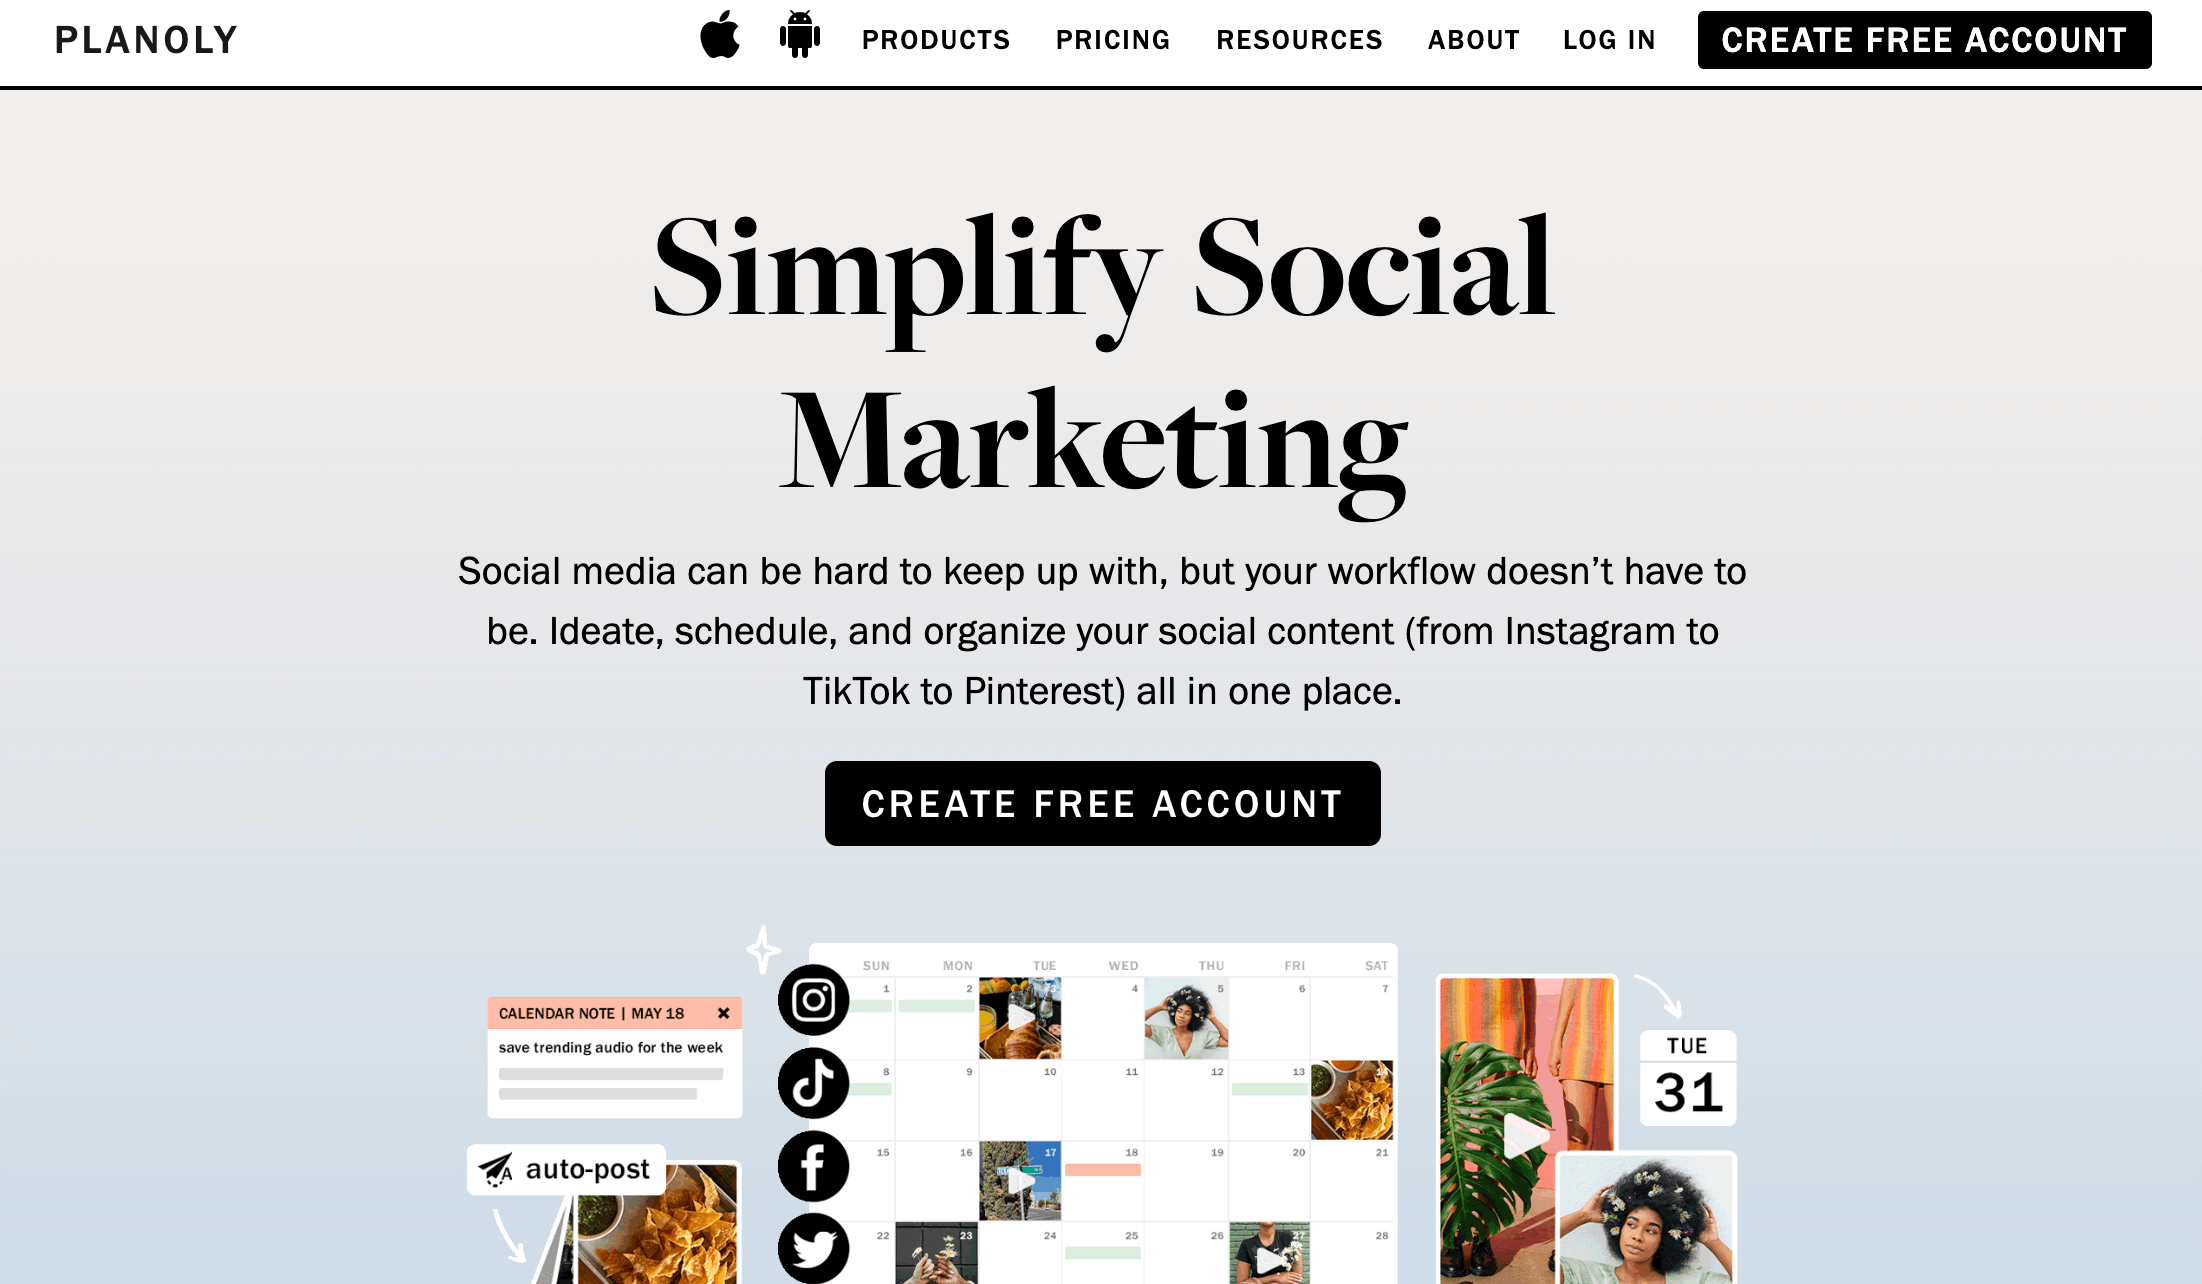 Planoly's home page